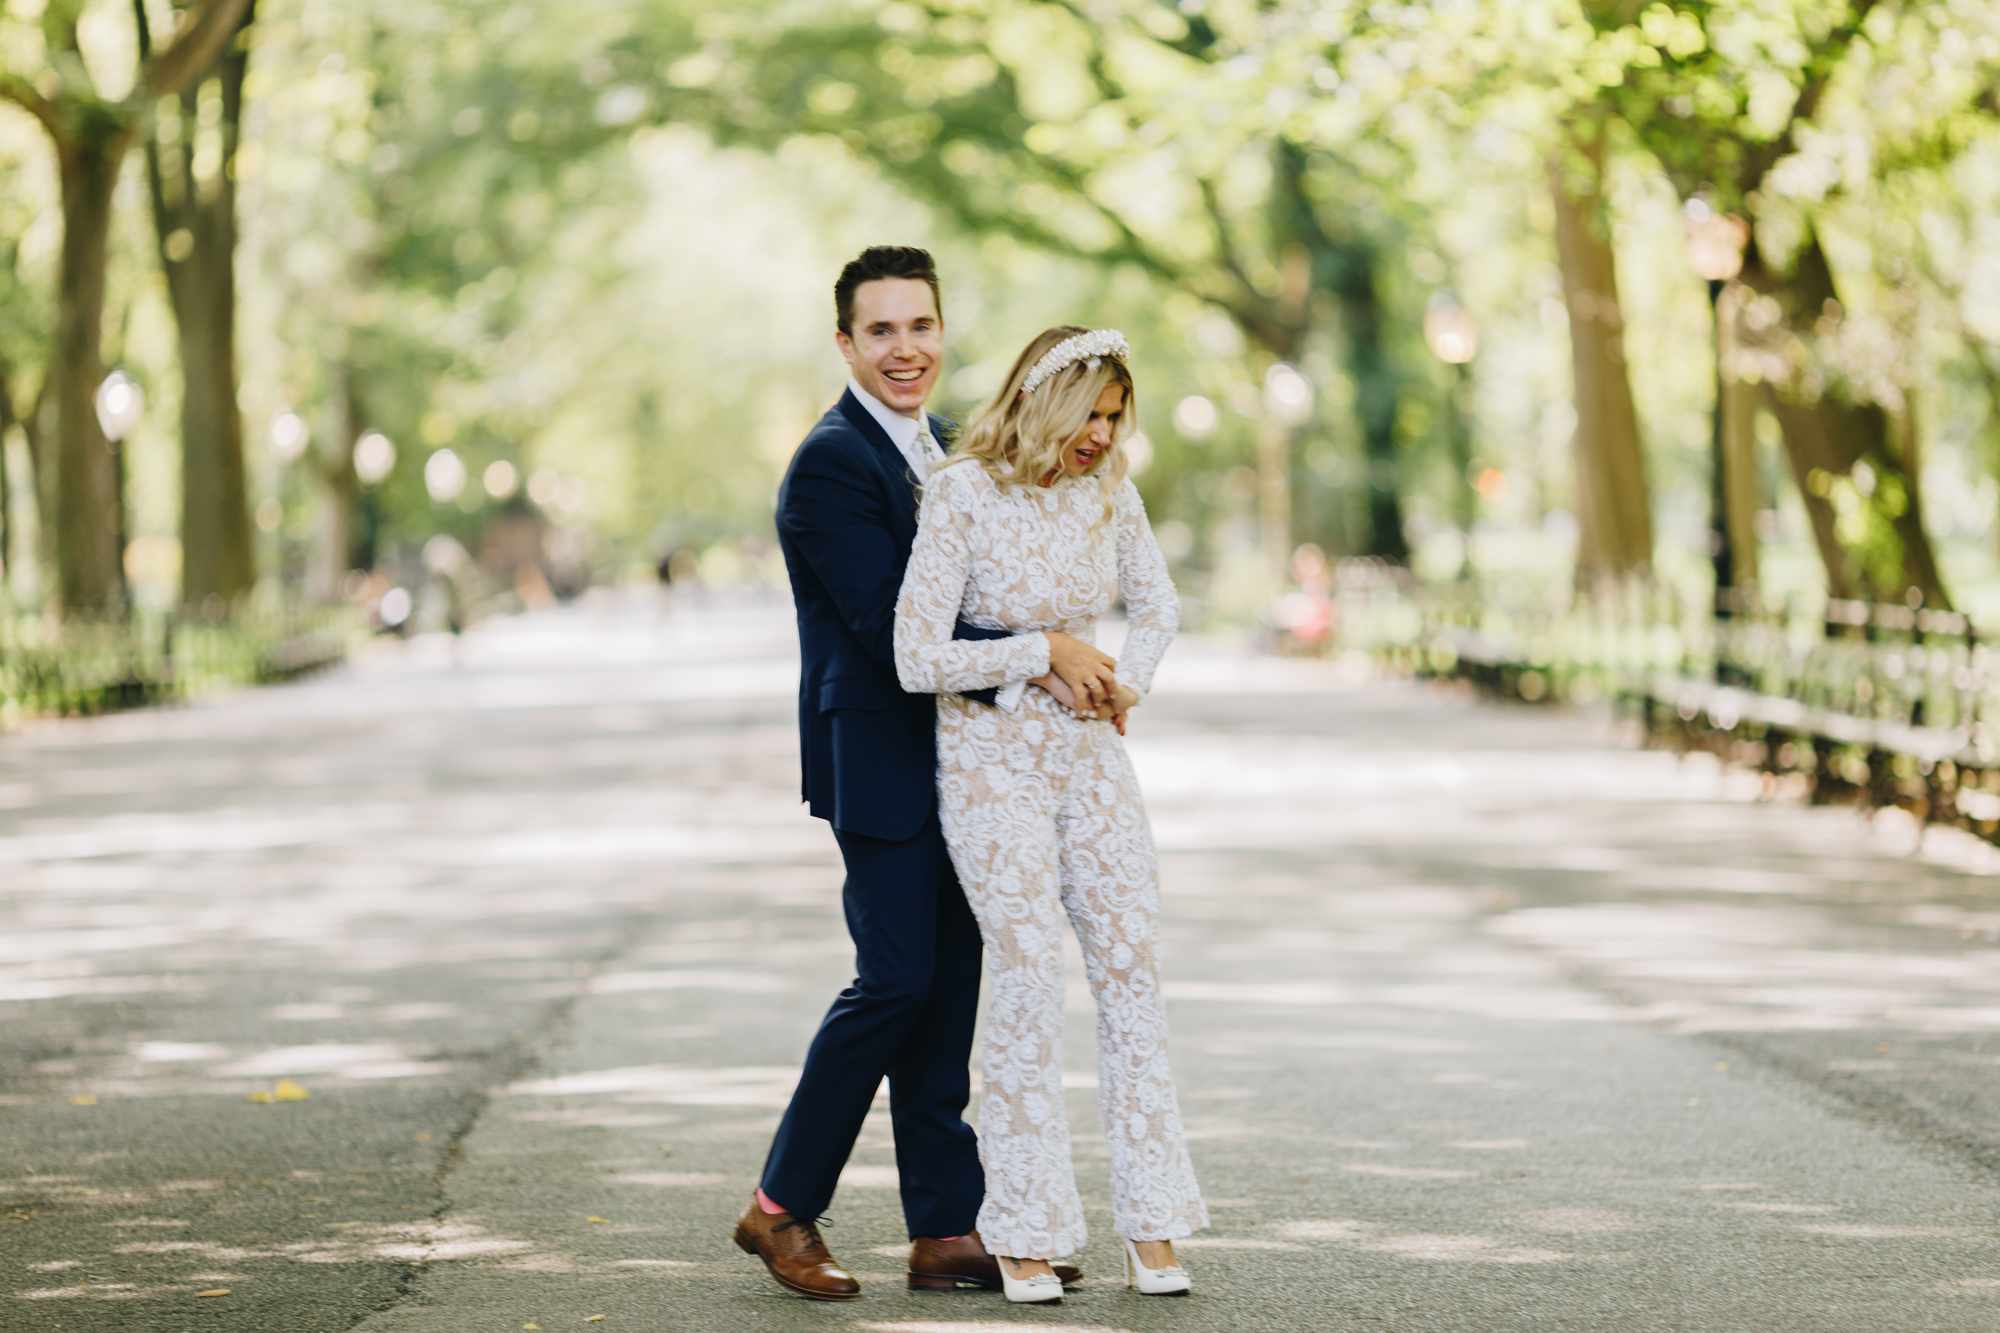 Fun Wagner Cove Elopement in Central Park